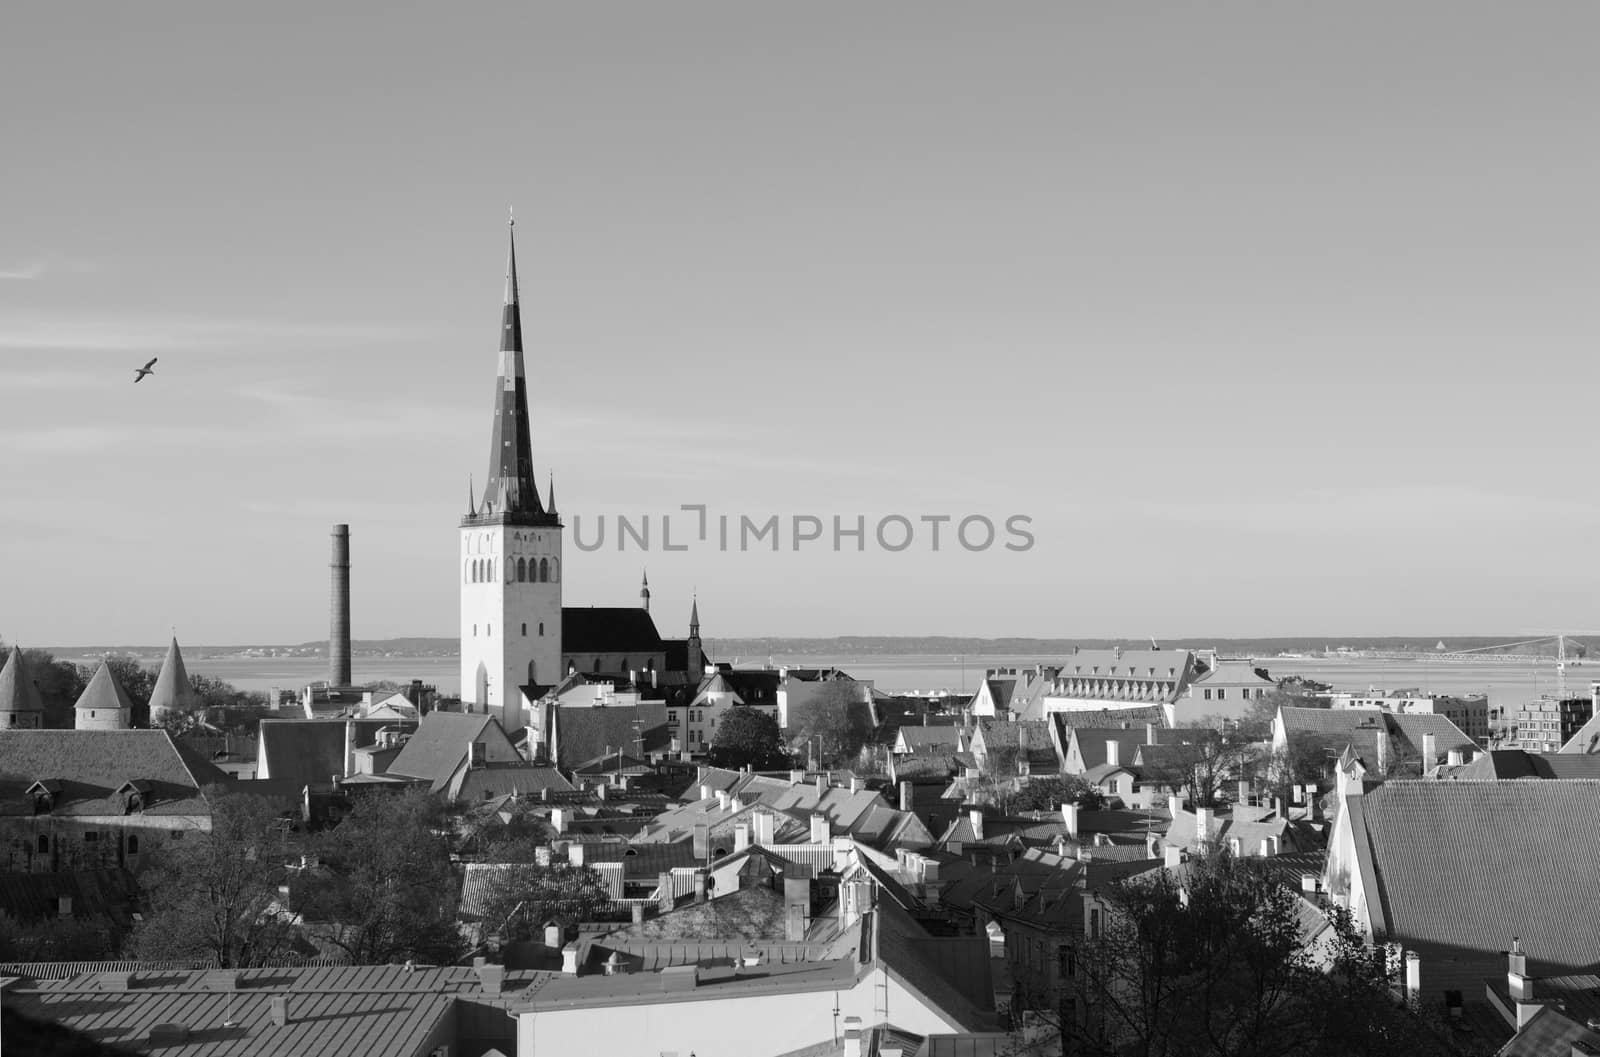 St Olaf's Church tower stands above the tiled roofs of the Old Town of Tallinn, capital city of Estonia. Beyond the cityscape lies Tallinn Bay - monochrome processing